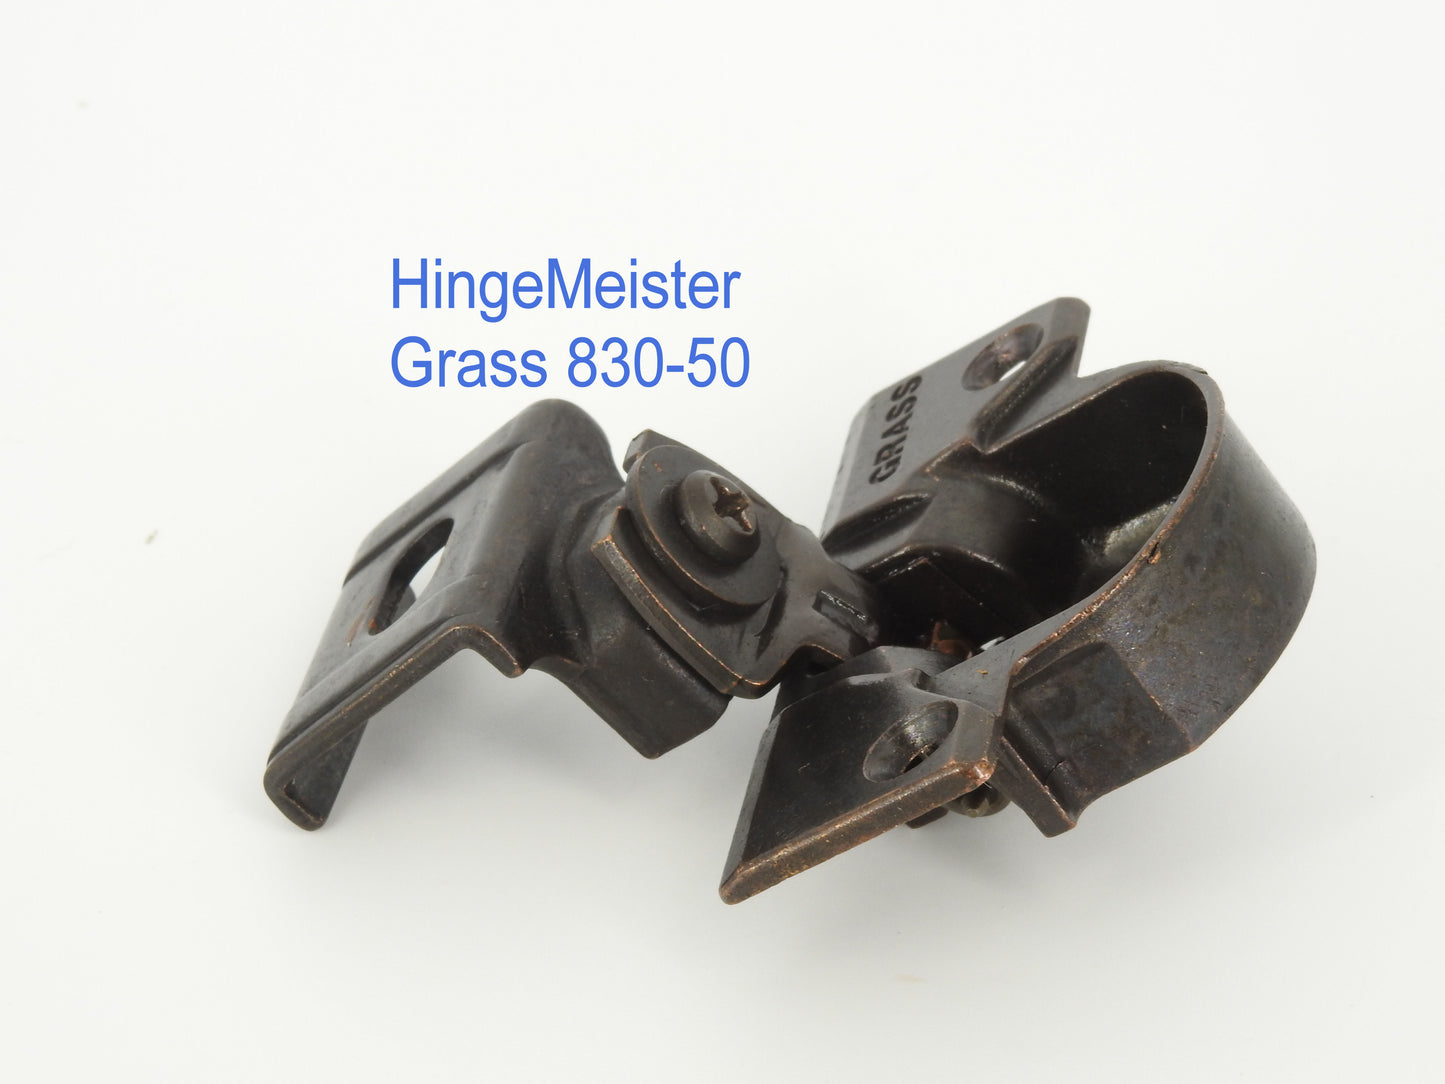 Grass 830-50 Bronze Hinge and mounting plate - Complete Hinge - Refurbished